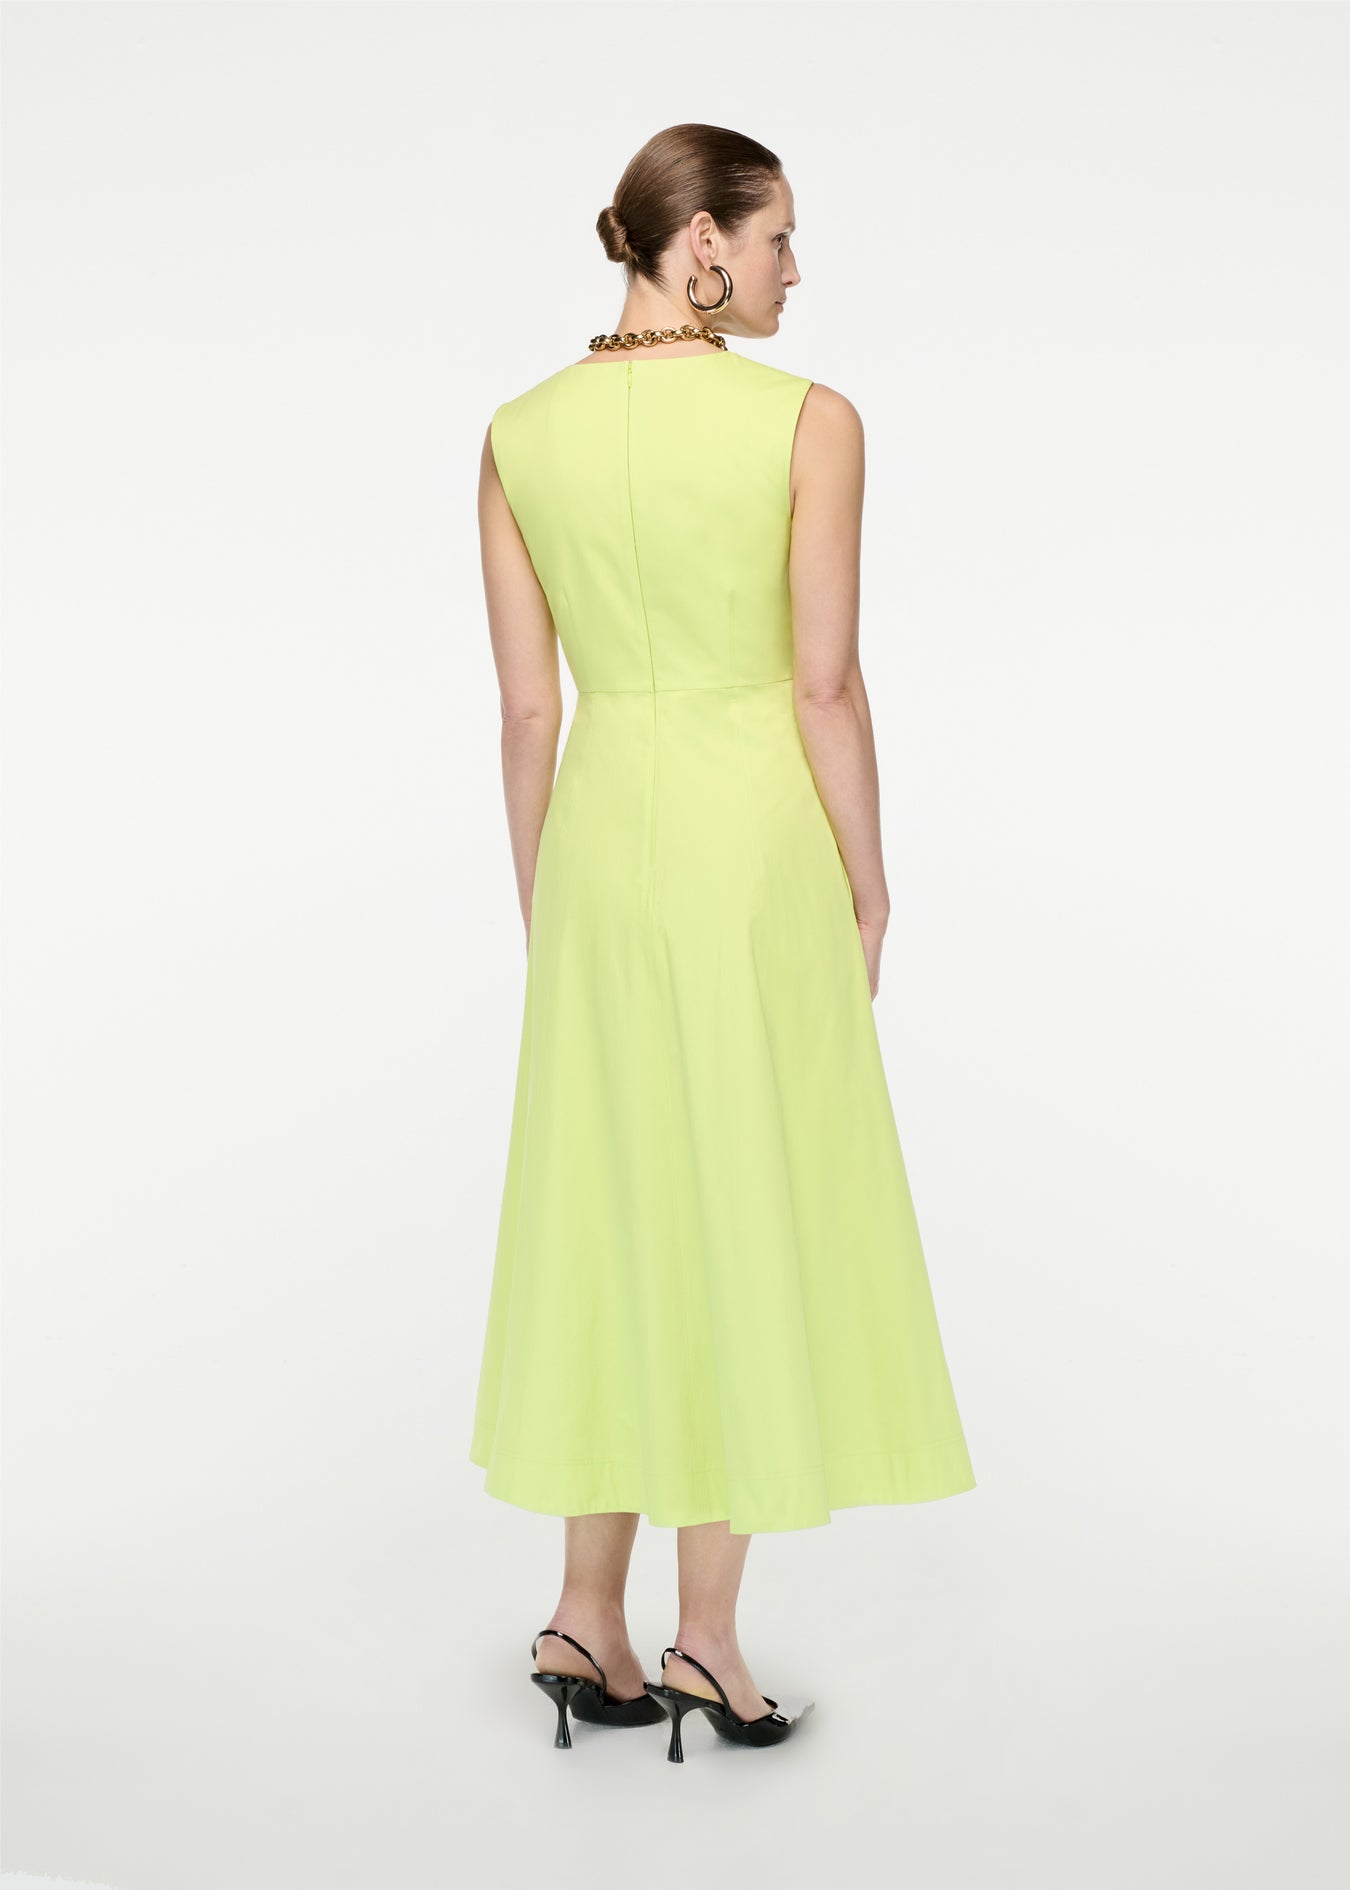 The back of a woman wearing the Cotton Poplin Midi Dress in Yellow